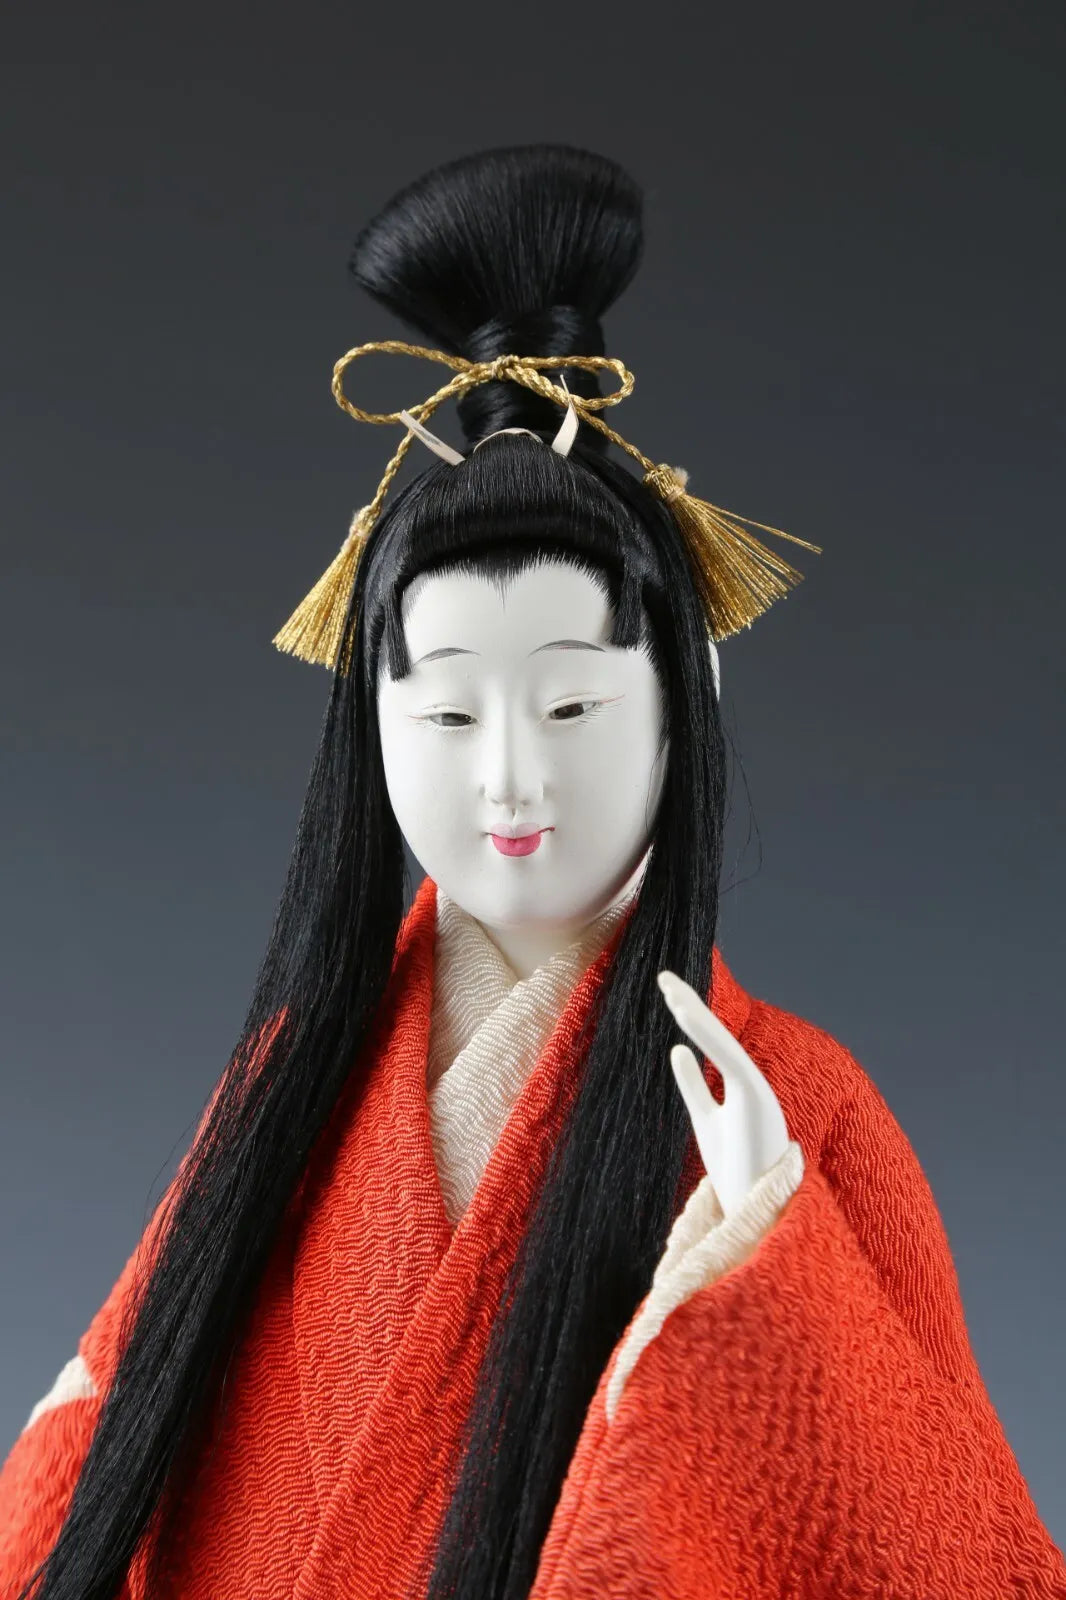 Collectible Japanese Vintage Geisha Doll in Classic Style and Traditional Kimono Clothing Ethnic Asian Decor.